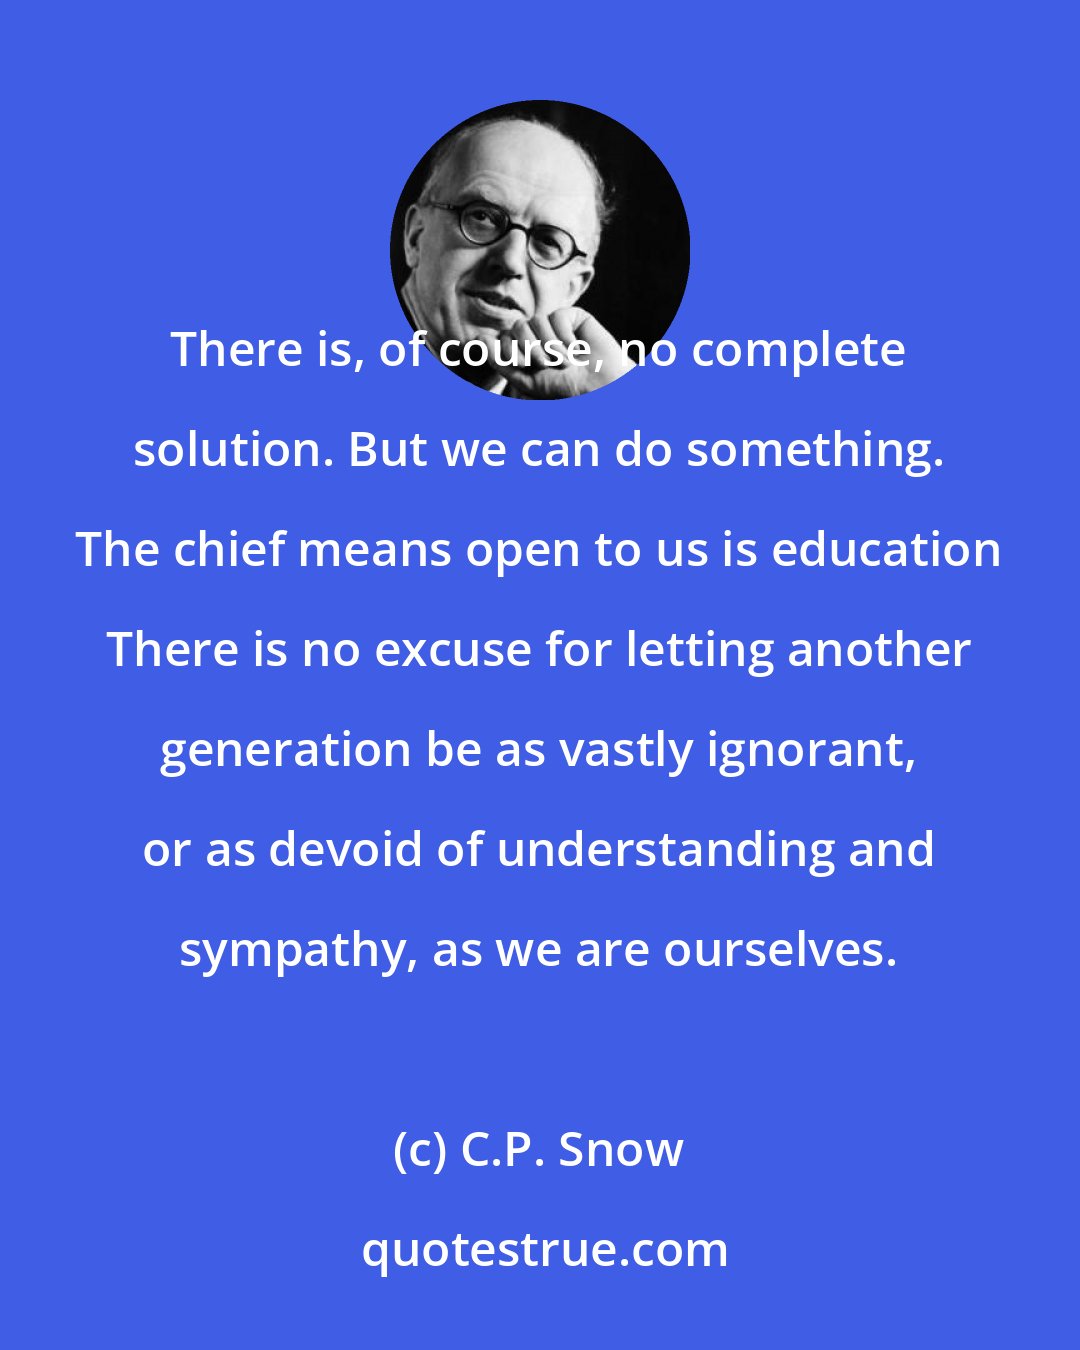 C.P. Snow: There is, of course, no complete solution. But we can do something. The chief means open to us is education There is no excuse for letting another generation be as vastly ignorant, or as devoid of understanding and sympathy, as we are ourselves.